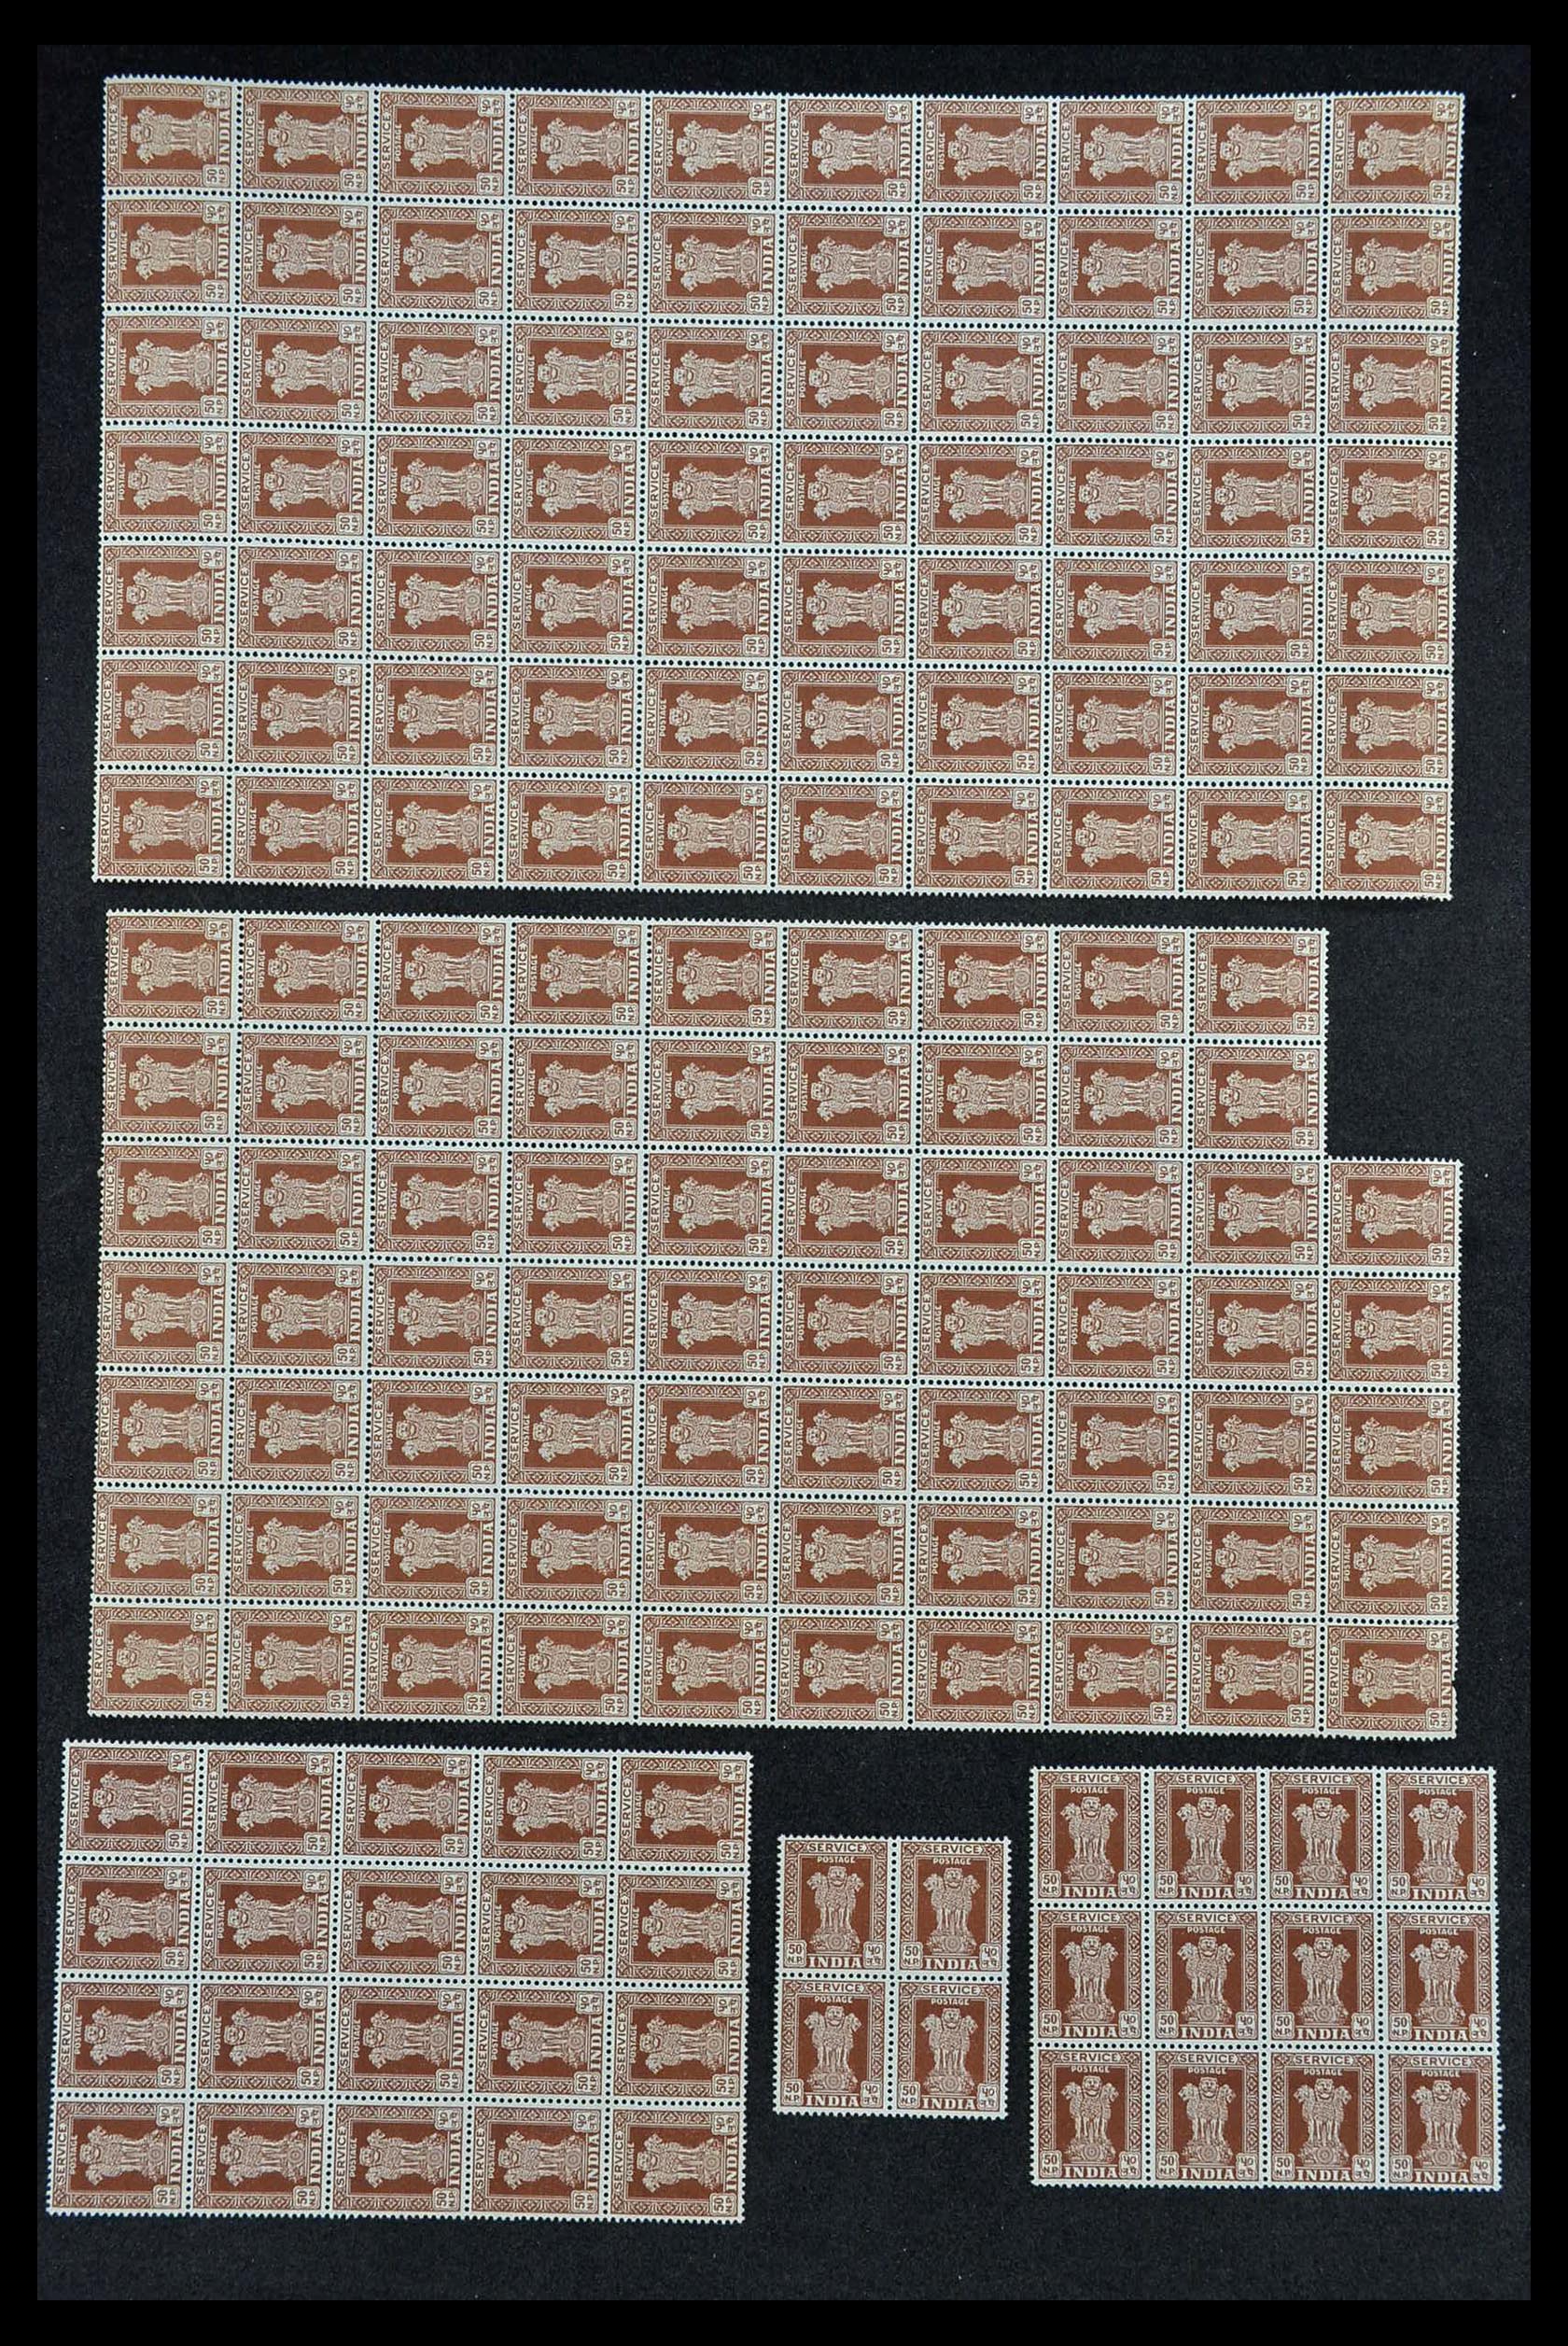 34016 055 - Stamp collection 34016 India service stamps 1958-1971.